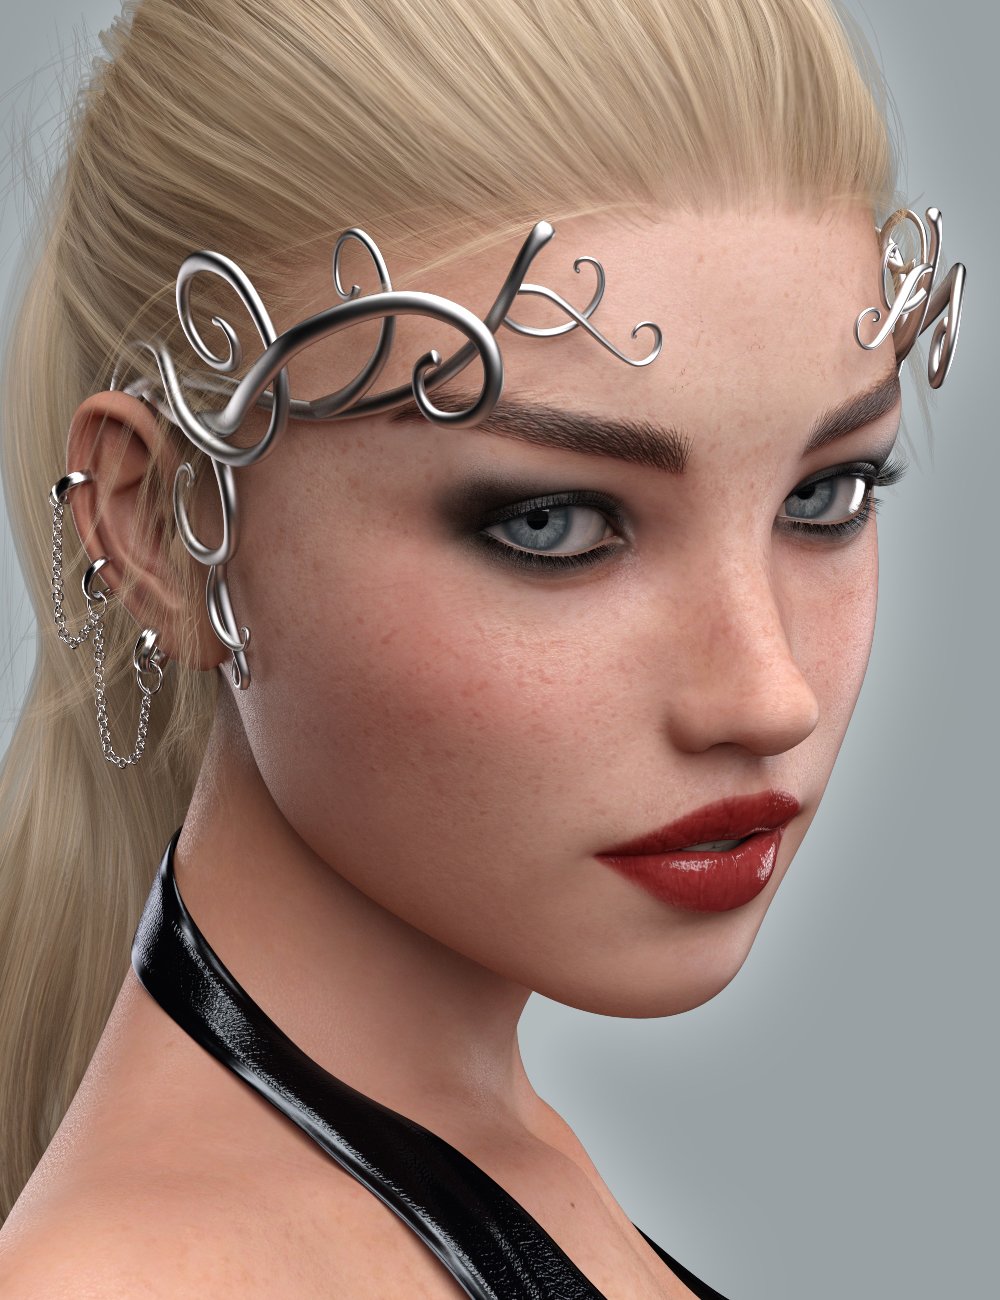 GDN Nathalia for Genesis 3 Female by: Valery3D, 3D Models by Daz 3D